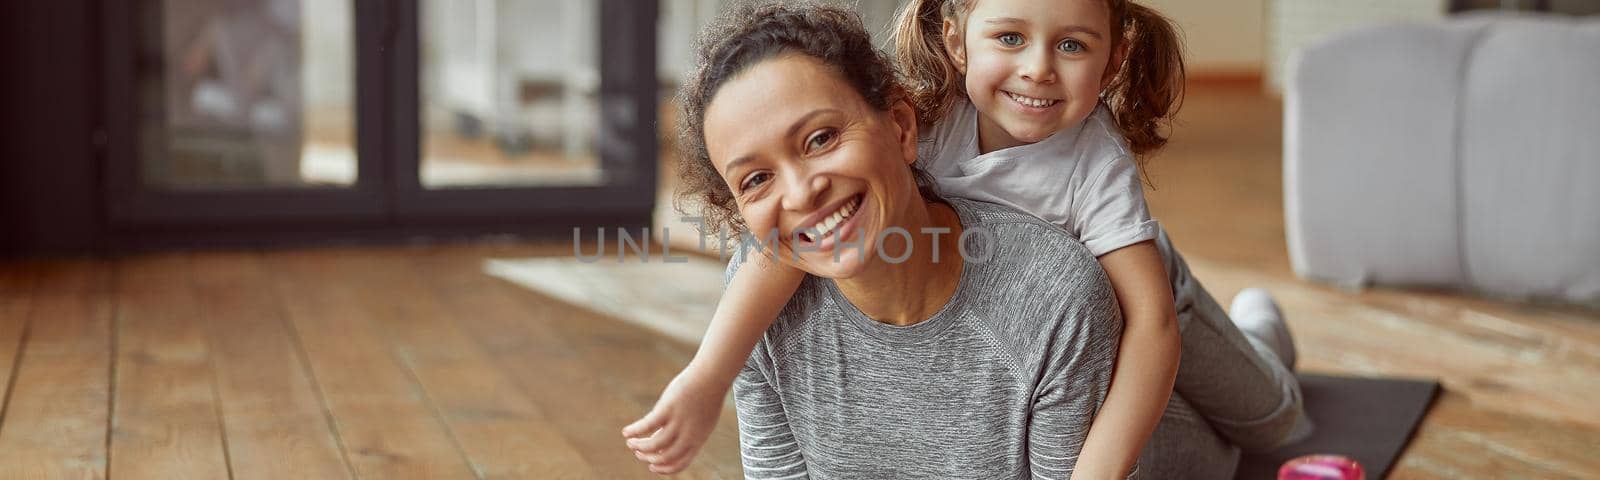 Happy mom and daughter spending active time indoors by Yaroslav_astakhov